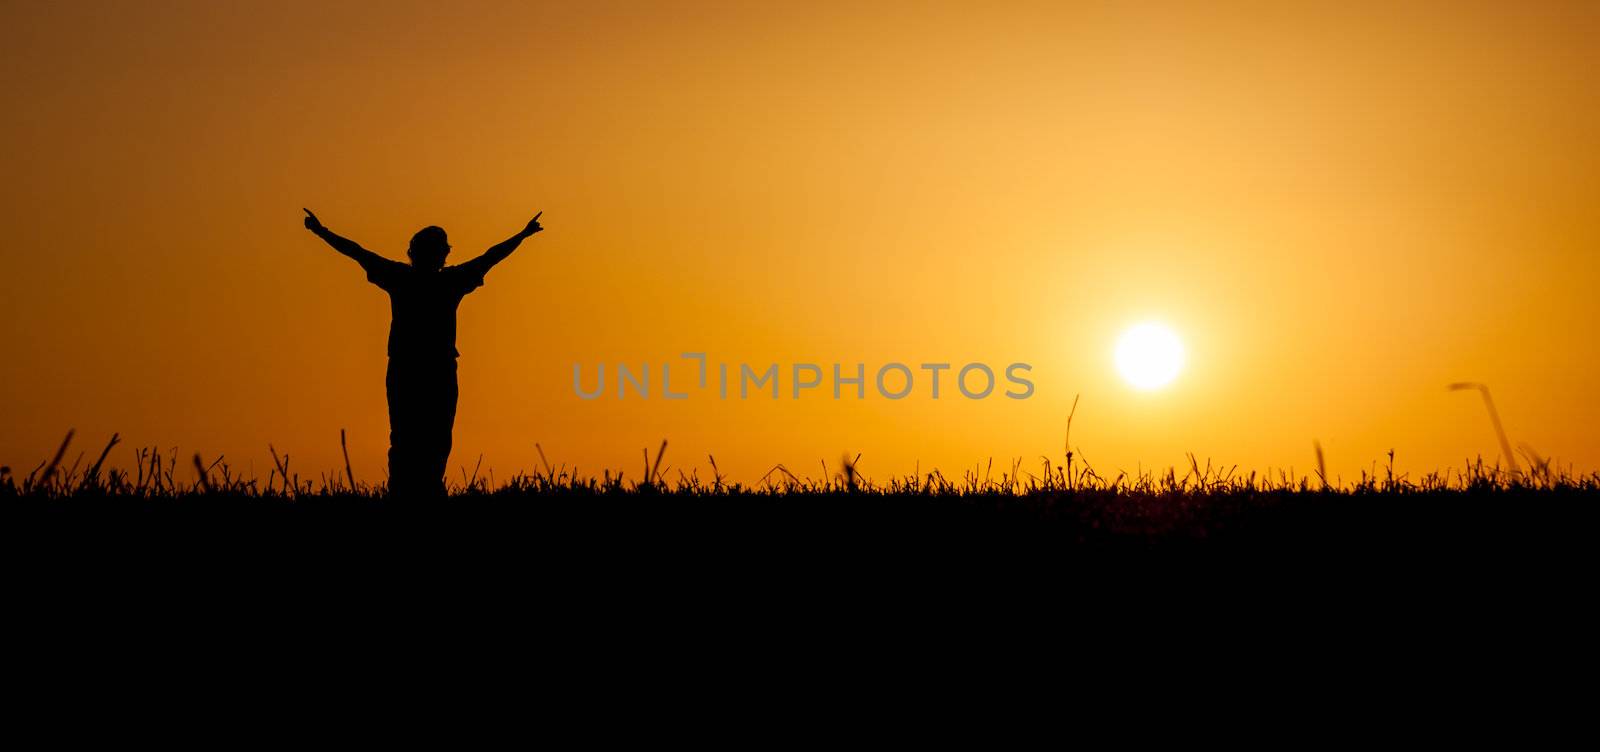 A person is celebrating life at a beautiful sunset or sunrise